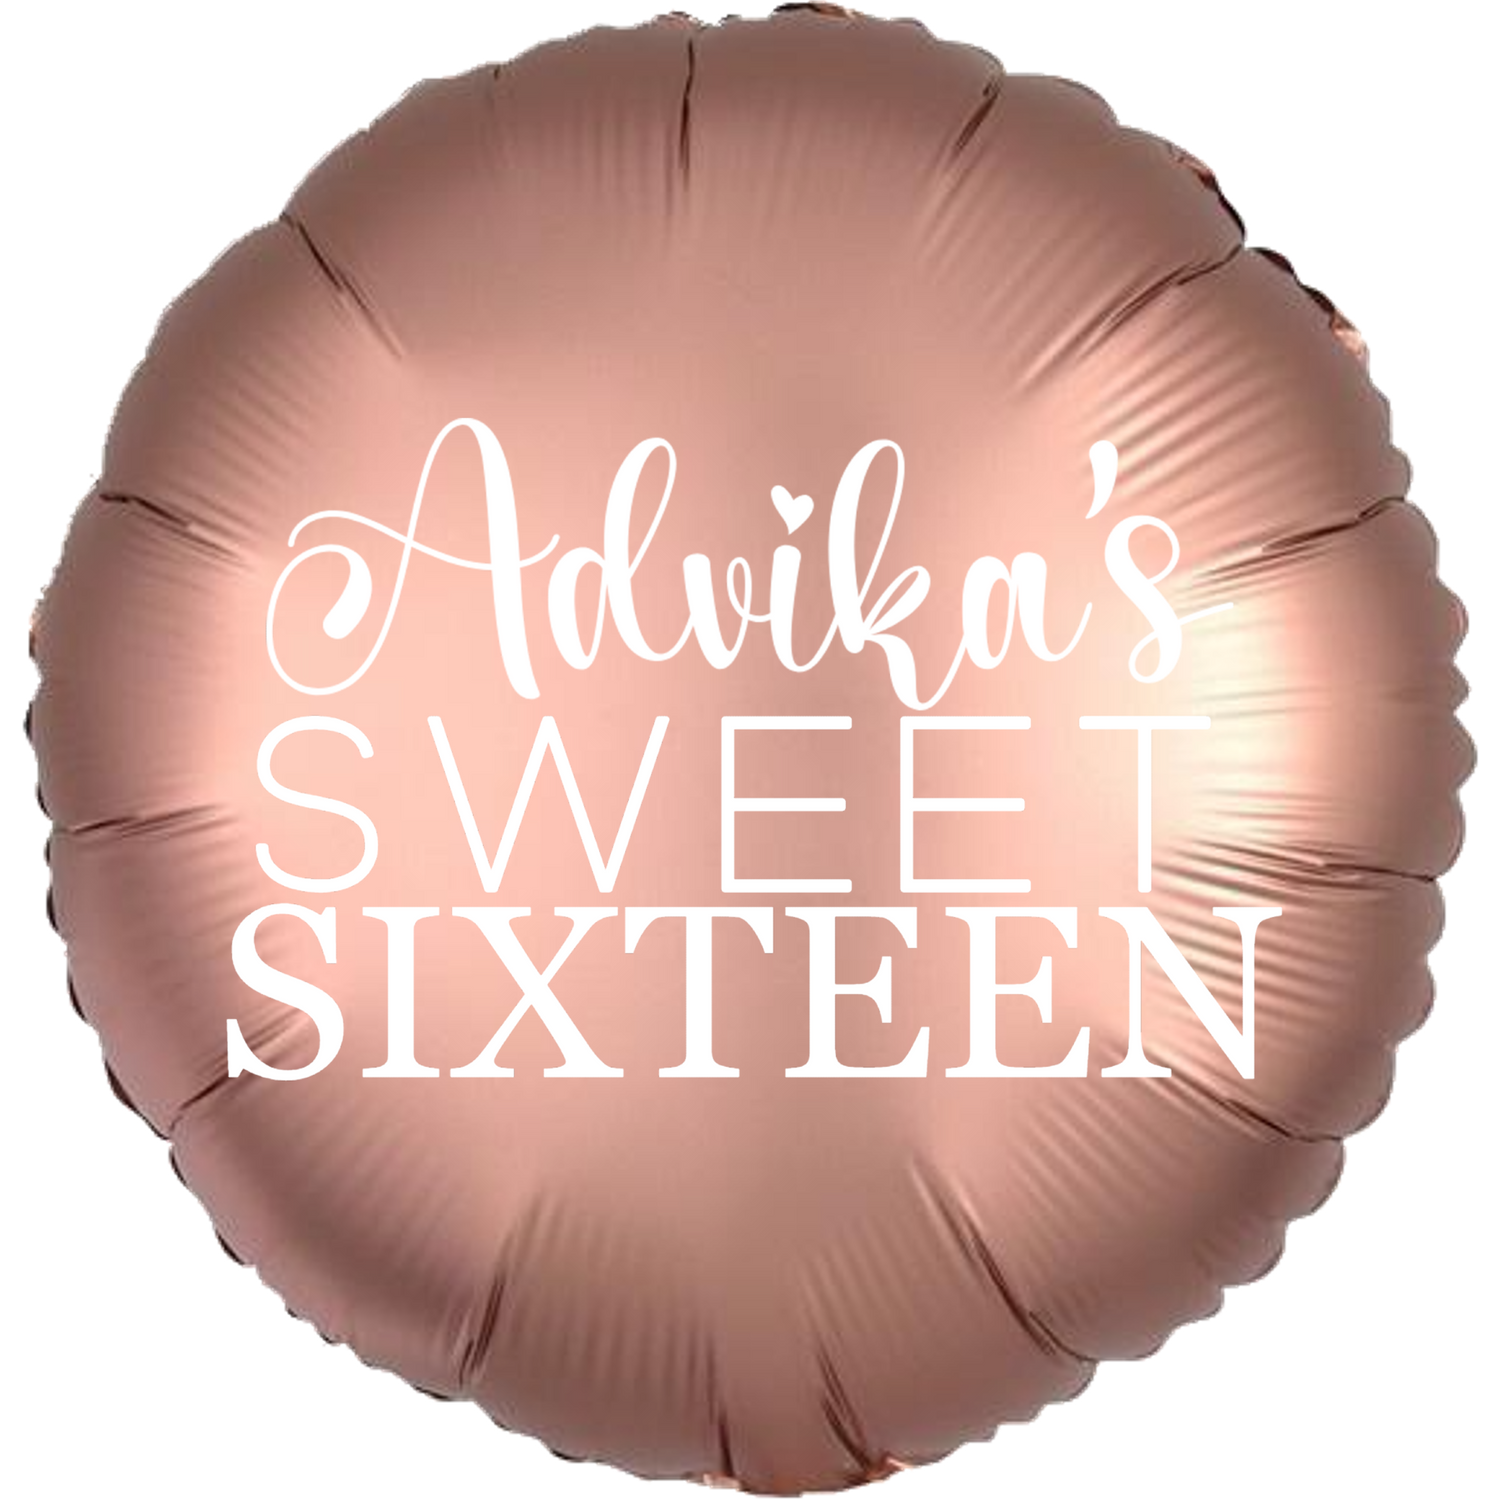 Custom Name/Text/Message Rose Gold Round Personalized Balloons For Sixteenth Birthday Party Event. Supports Helium/Air, Luxury Bespoke Balloons Are Perfect To Surprise Your Friends/Siblings/Girlfriend On Their 16Th Birthday. Perfect For Indoor And Outdoor Decorations, Surprise Parties, Room & Hall Decorations.